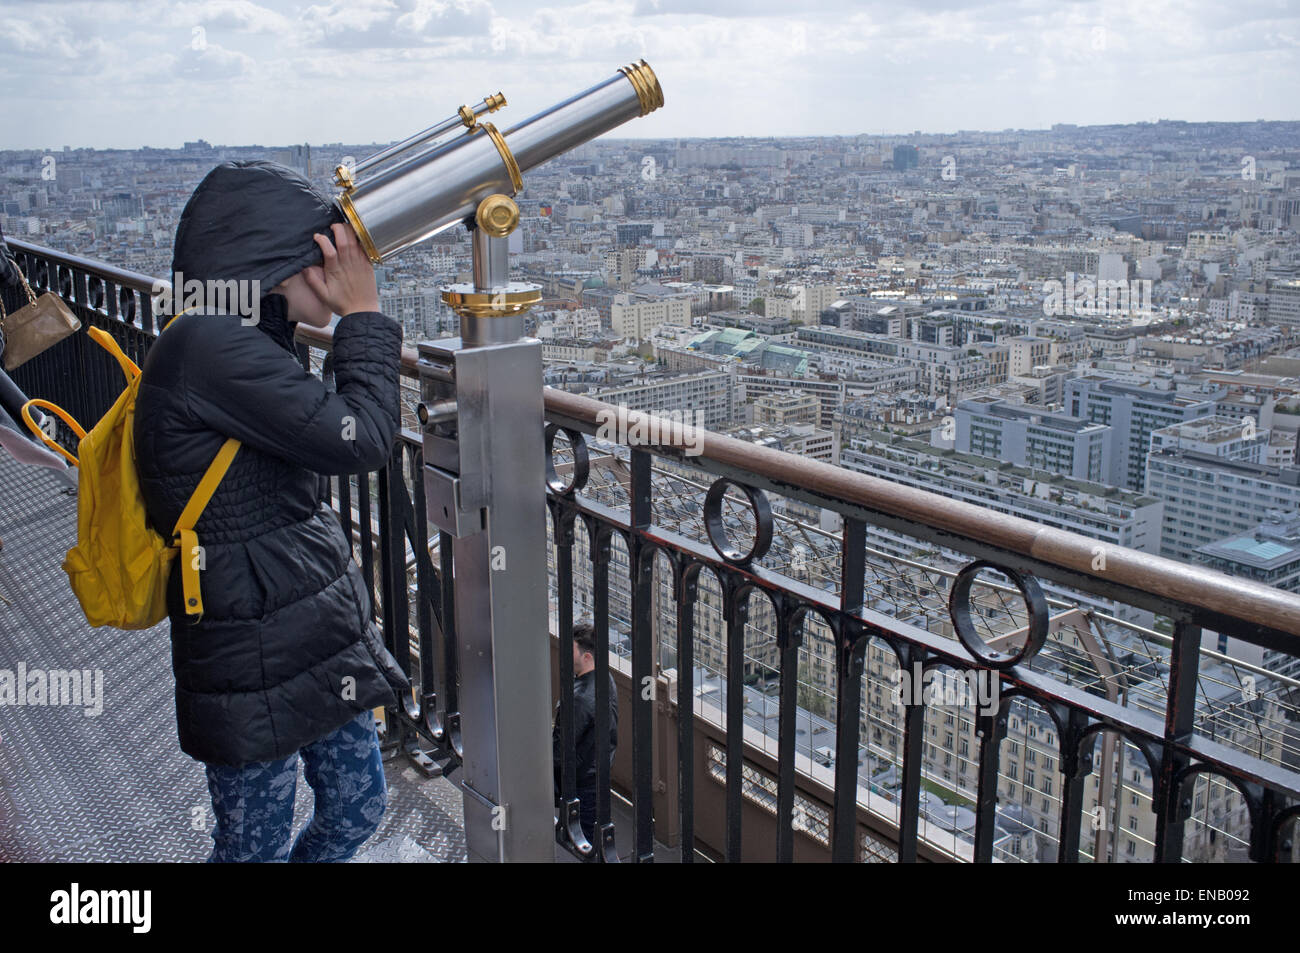 A child looking through a telescope on the Eiffel Tower Stock Photo